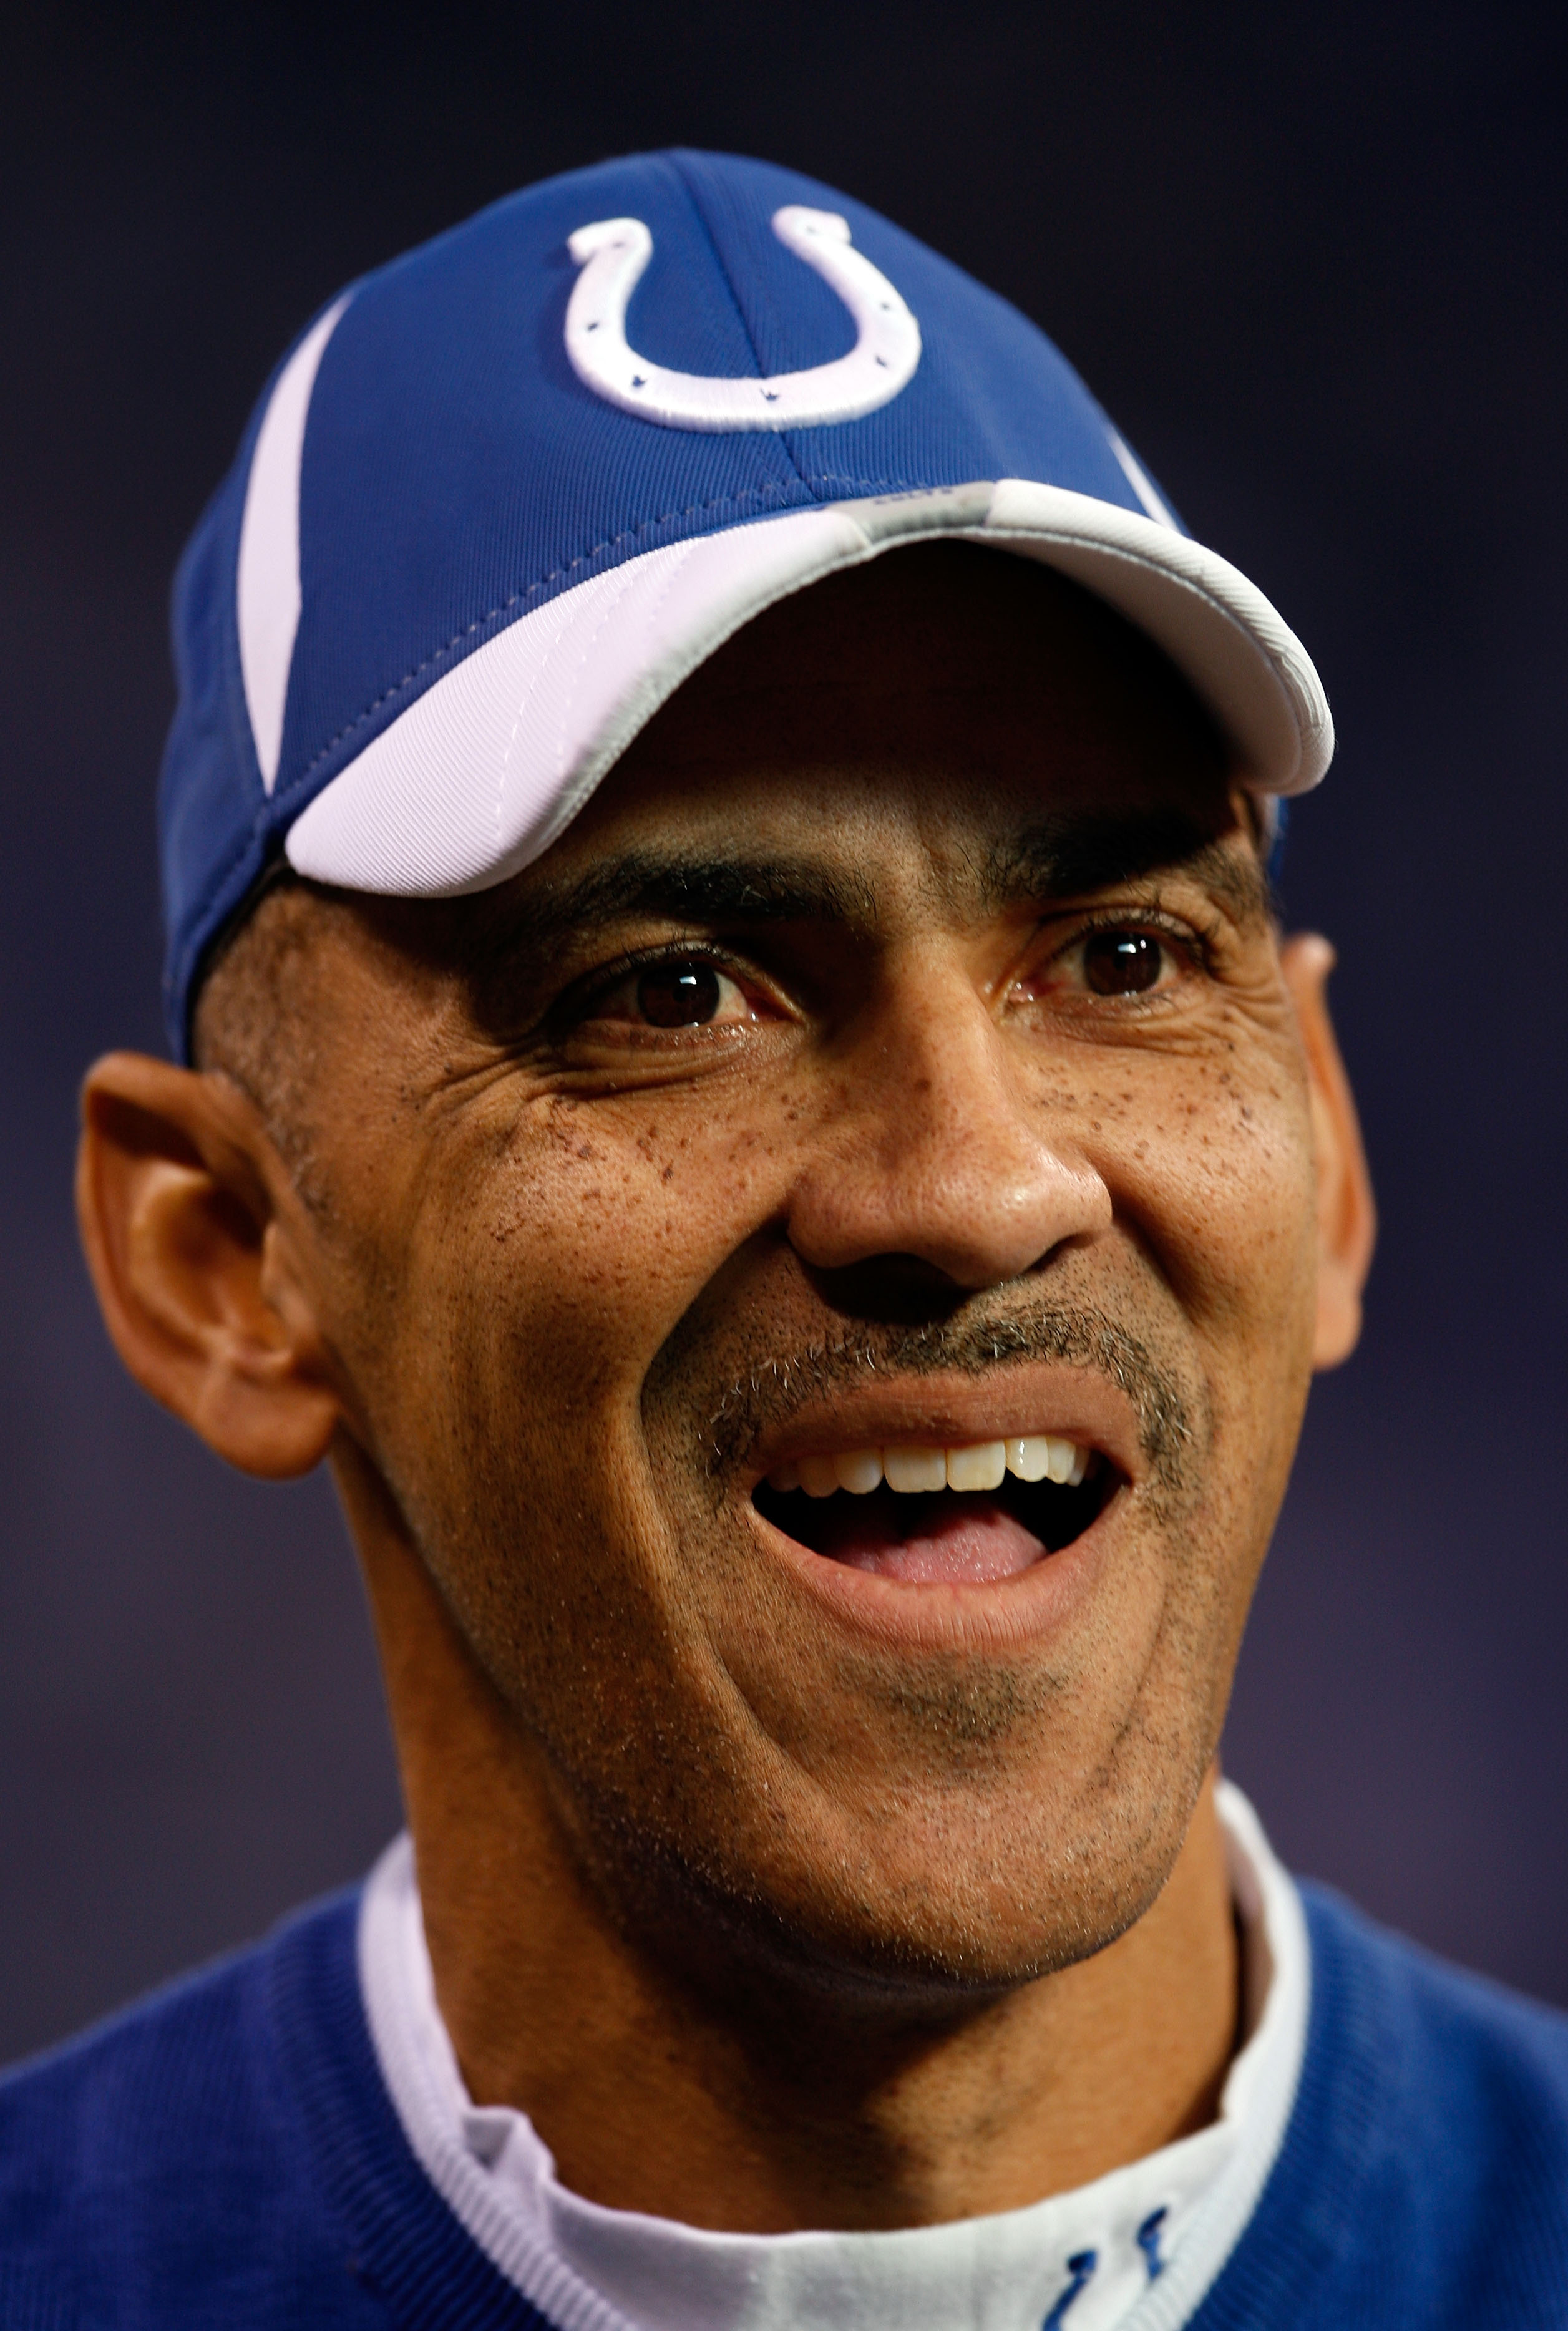 INDIANAPOLIS - DECEMBER 28:  Head coach Tony Dungy of the Indianapolis Colts talks to fans prior to the start of the game against the Tennessee Titans at Lucas Oil Stadium December 28, 2008 in Indianapolis, Indiana.  (Photo by Jamie Squire/Getty Images)